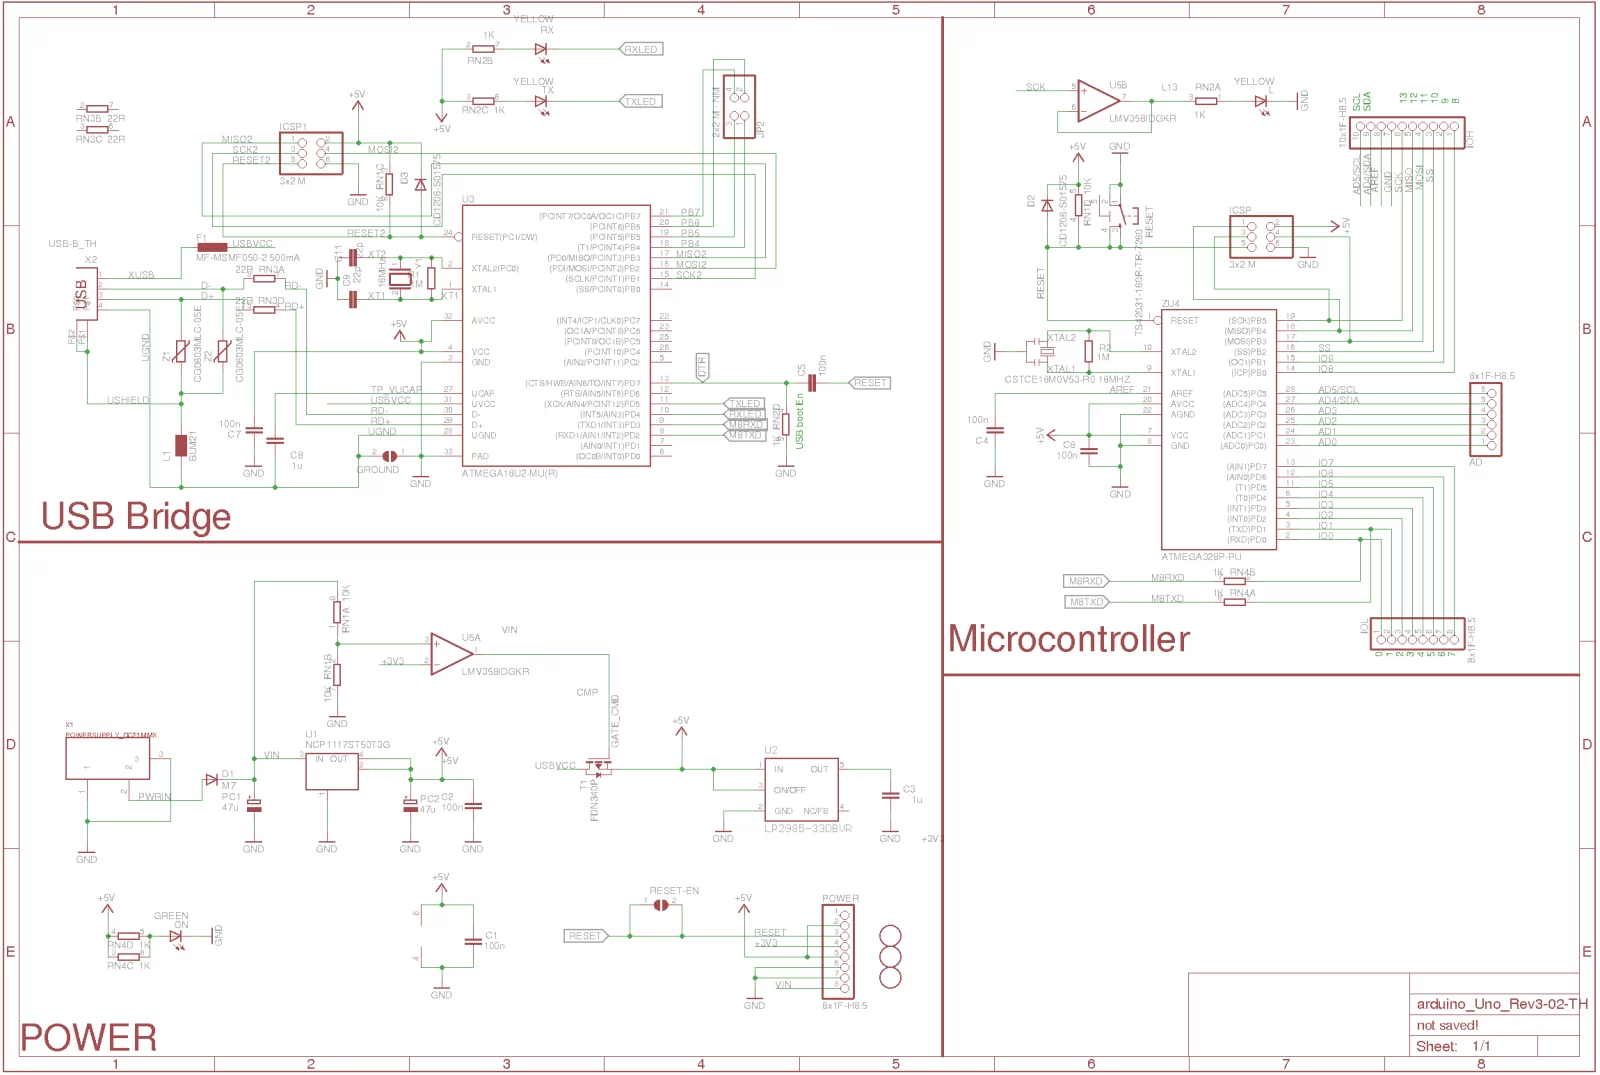 PCB and schematic using Eagle CAD